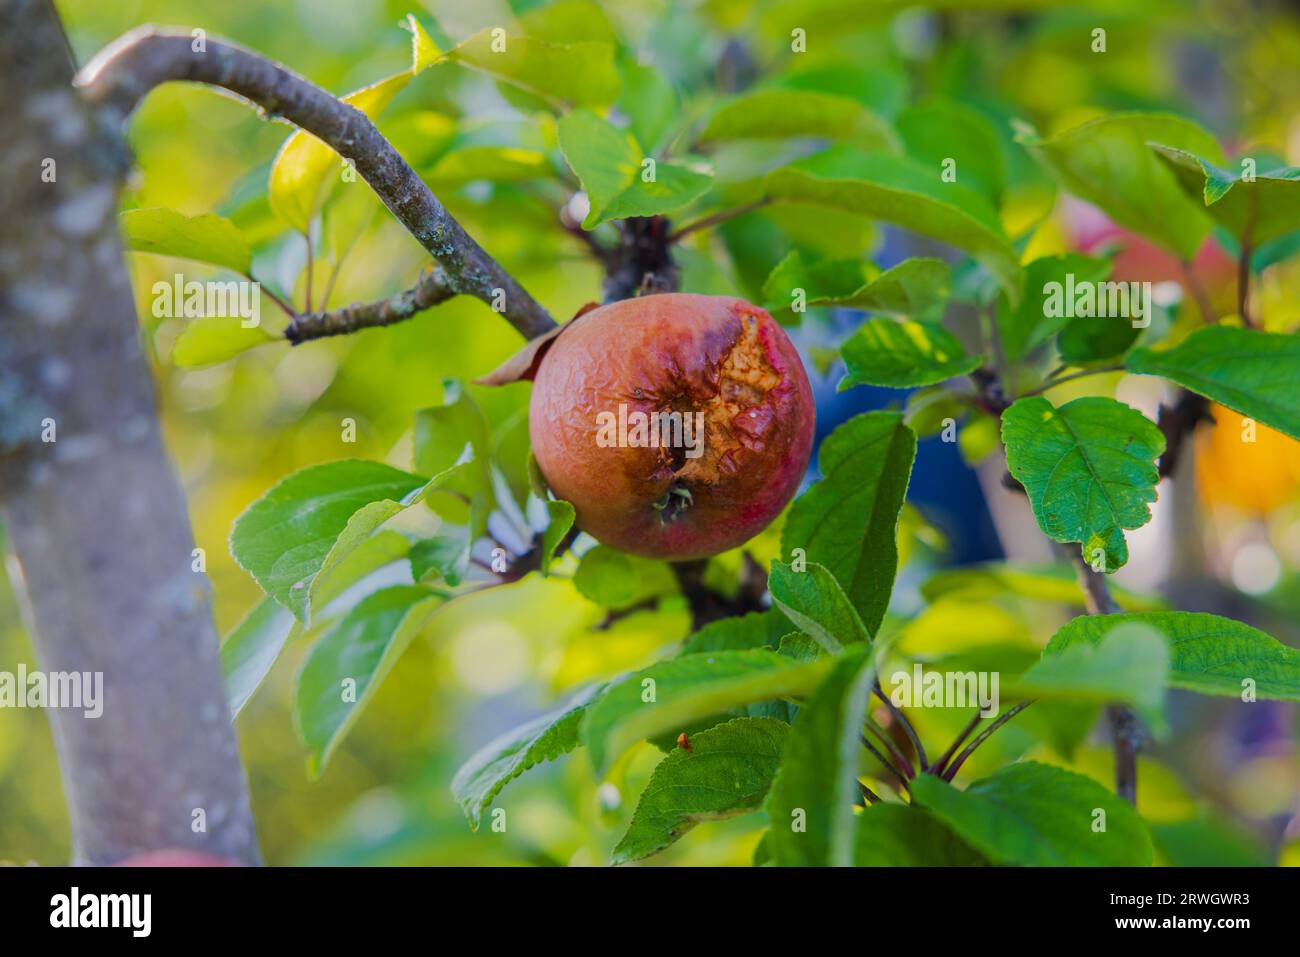 Close up view of rotten apple growing on apple tree. Stock Photo